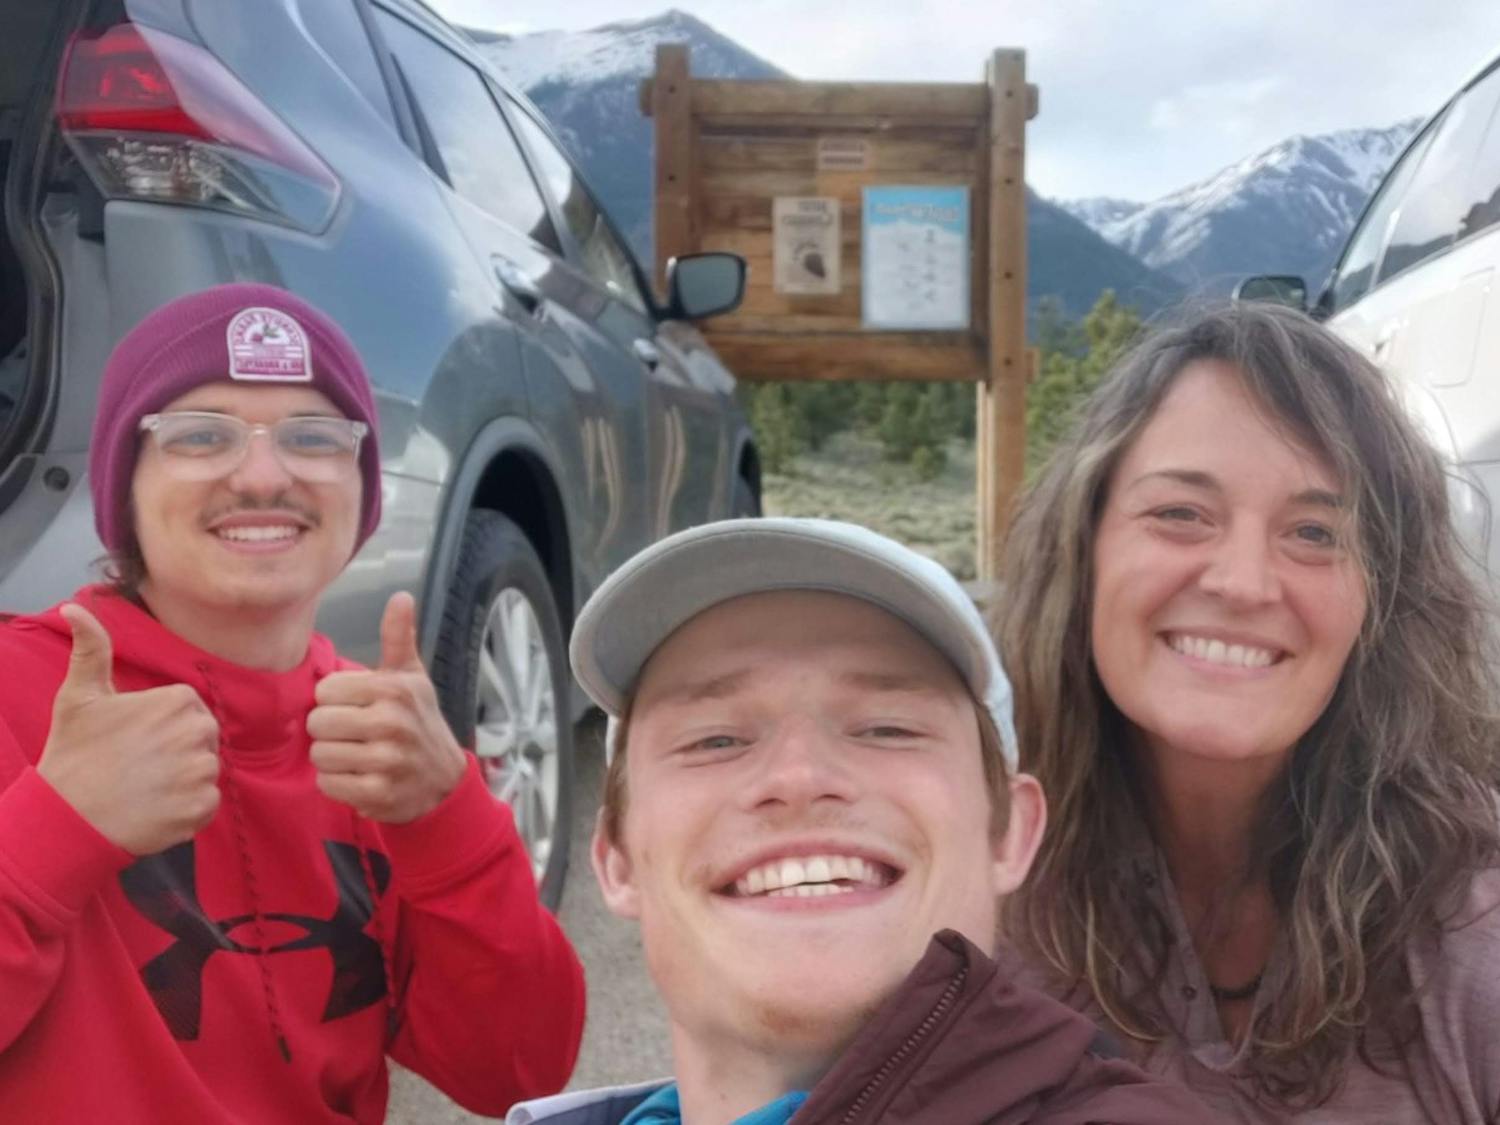 Collin Searles (left) and Nick Metz (center) pose with an unknown woman at a trail head.